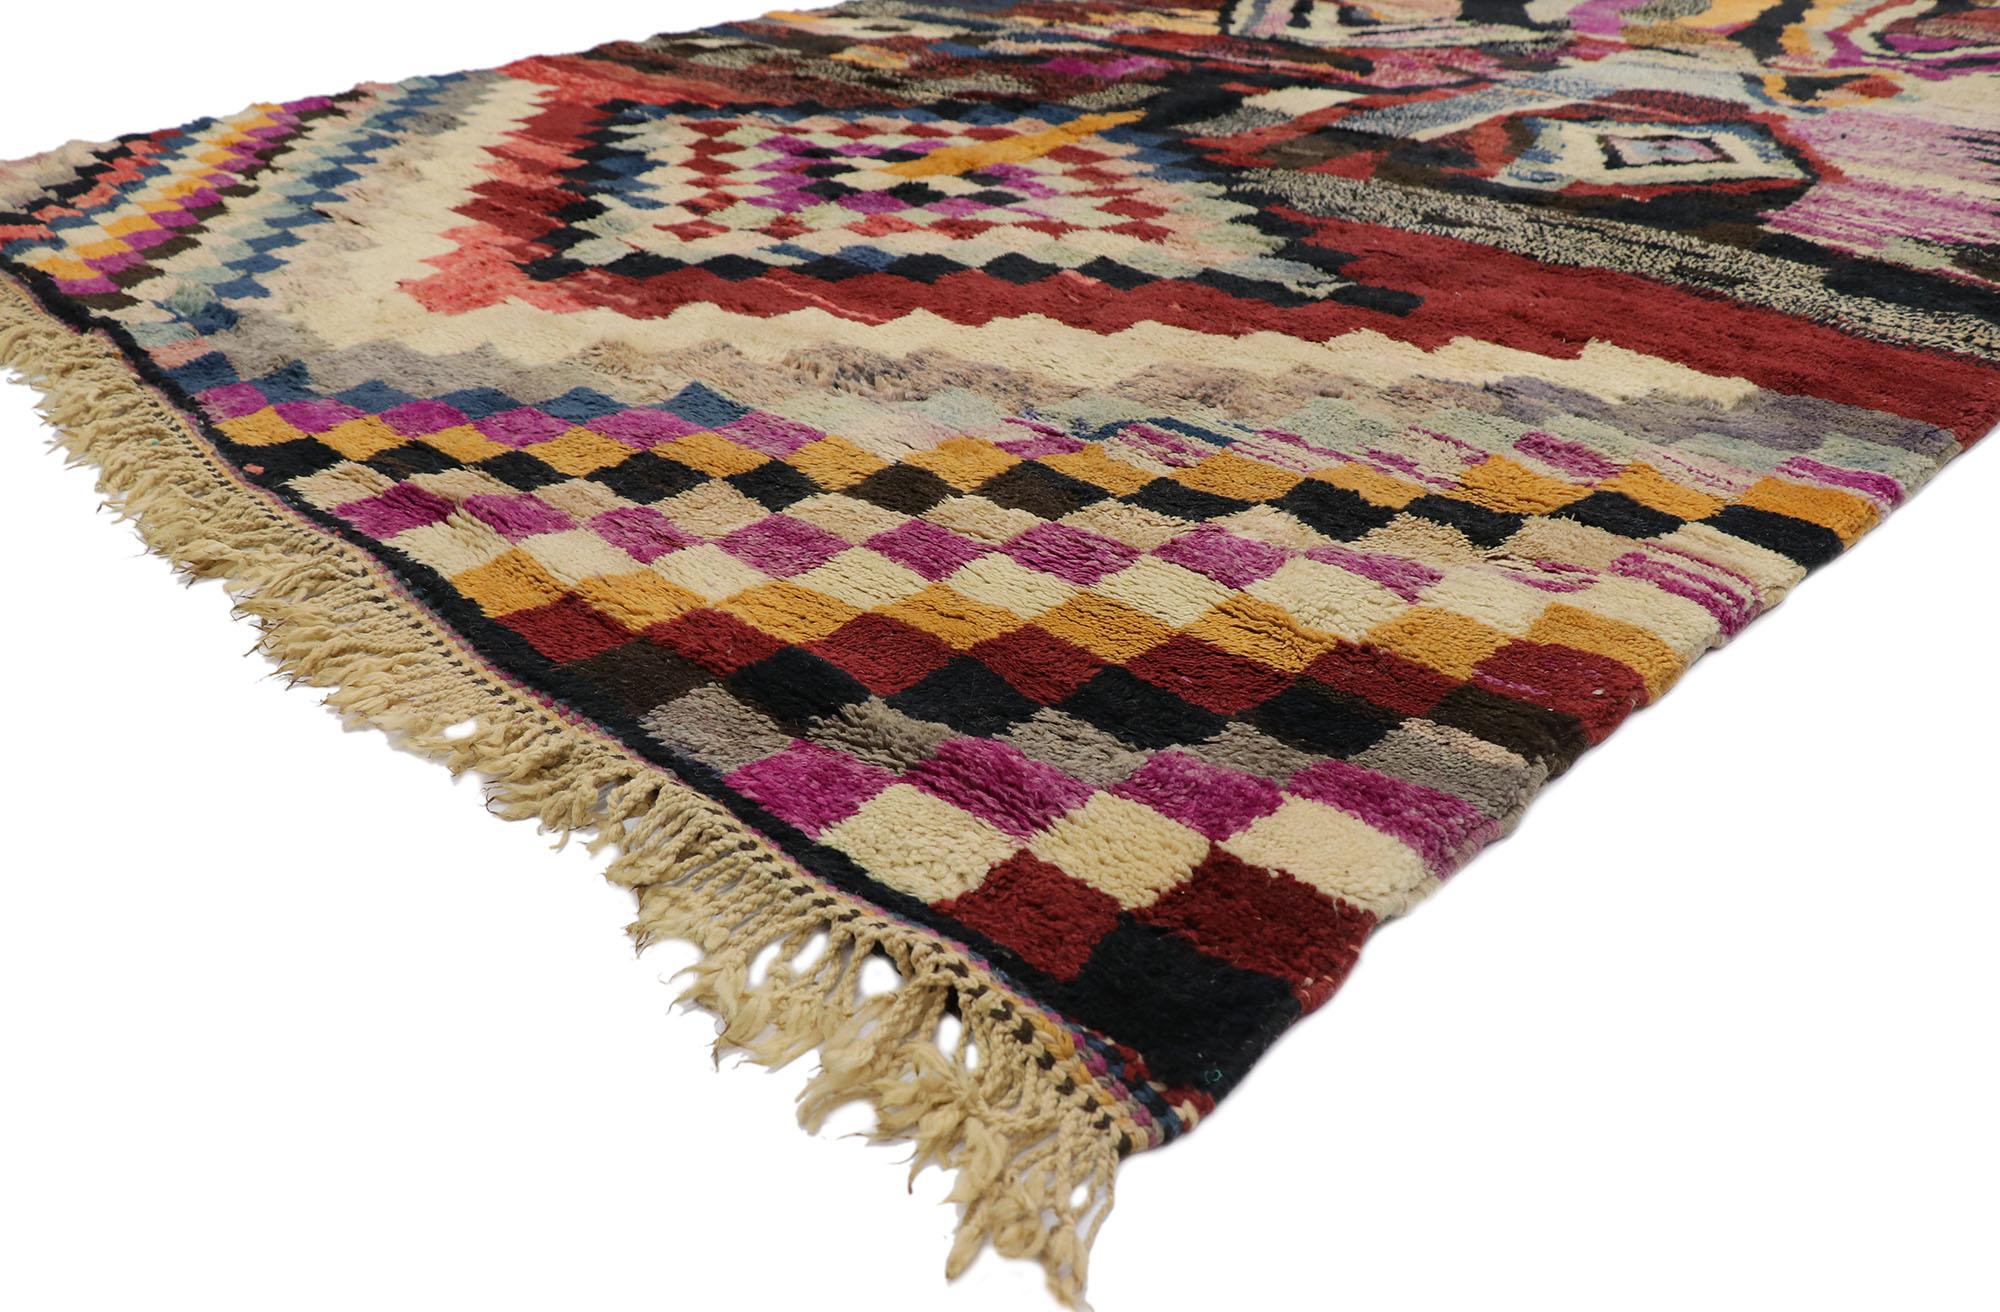 21647 New contemporary berber Moroccan rug with Tribal style Measures: 08'09 x 11'01. Showcasing a bold expressive design and well-balanced asymmetry with incredible detail and texture, this hand knotted wool contemporary Berber Moroccan rug is a